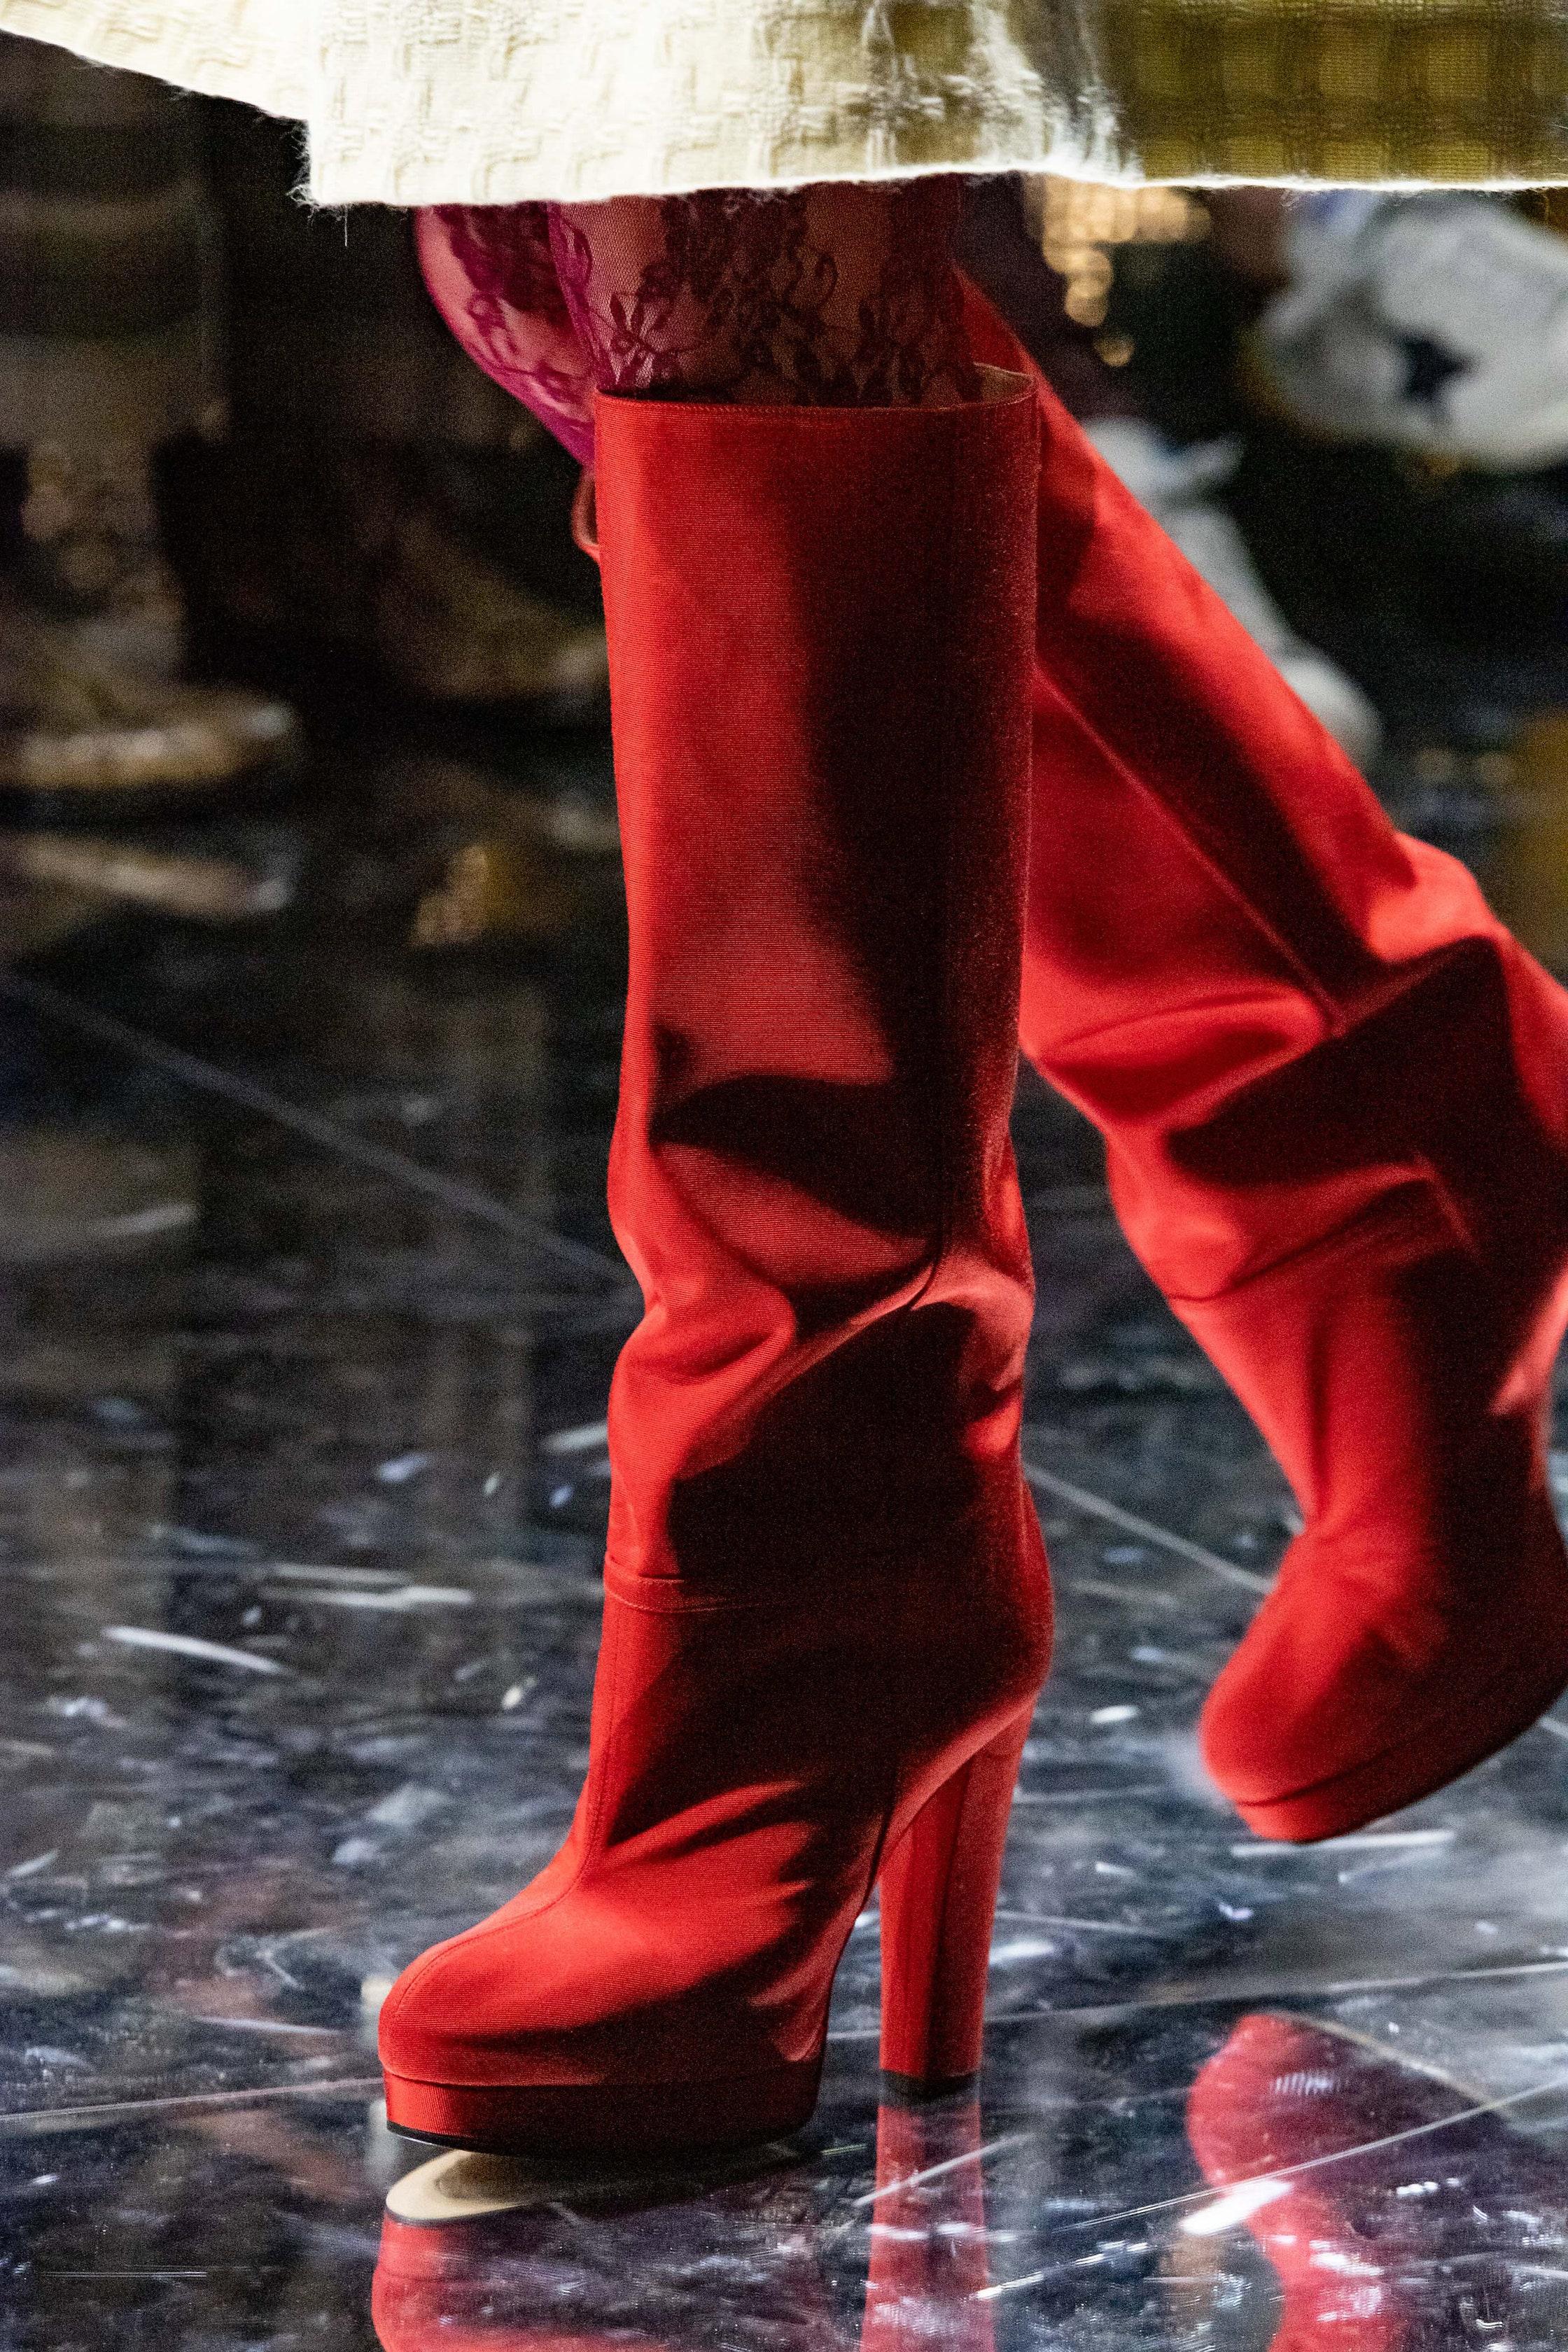 New With Box Gucci Fall 2019 Alessandro Michele Red Boots Sz 36.5 10